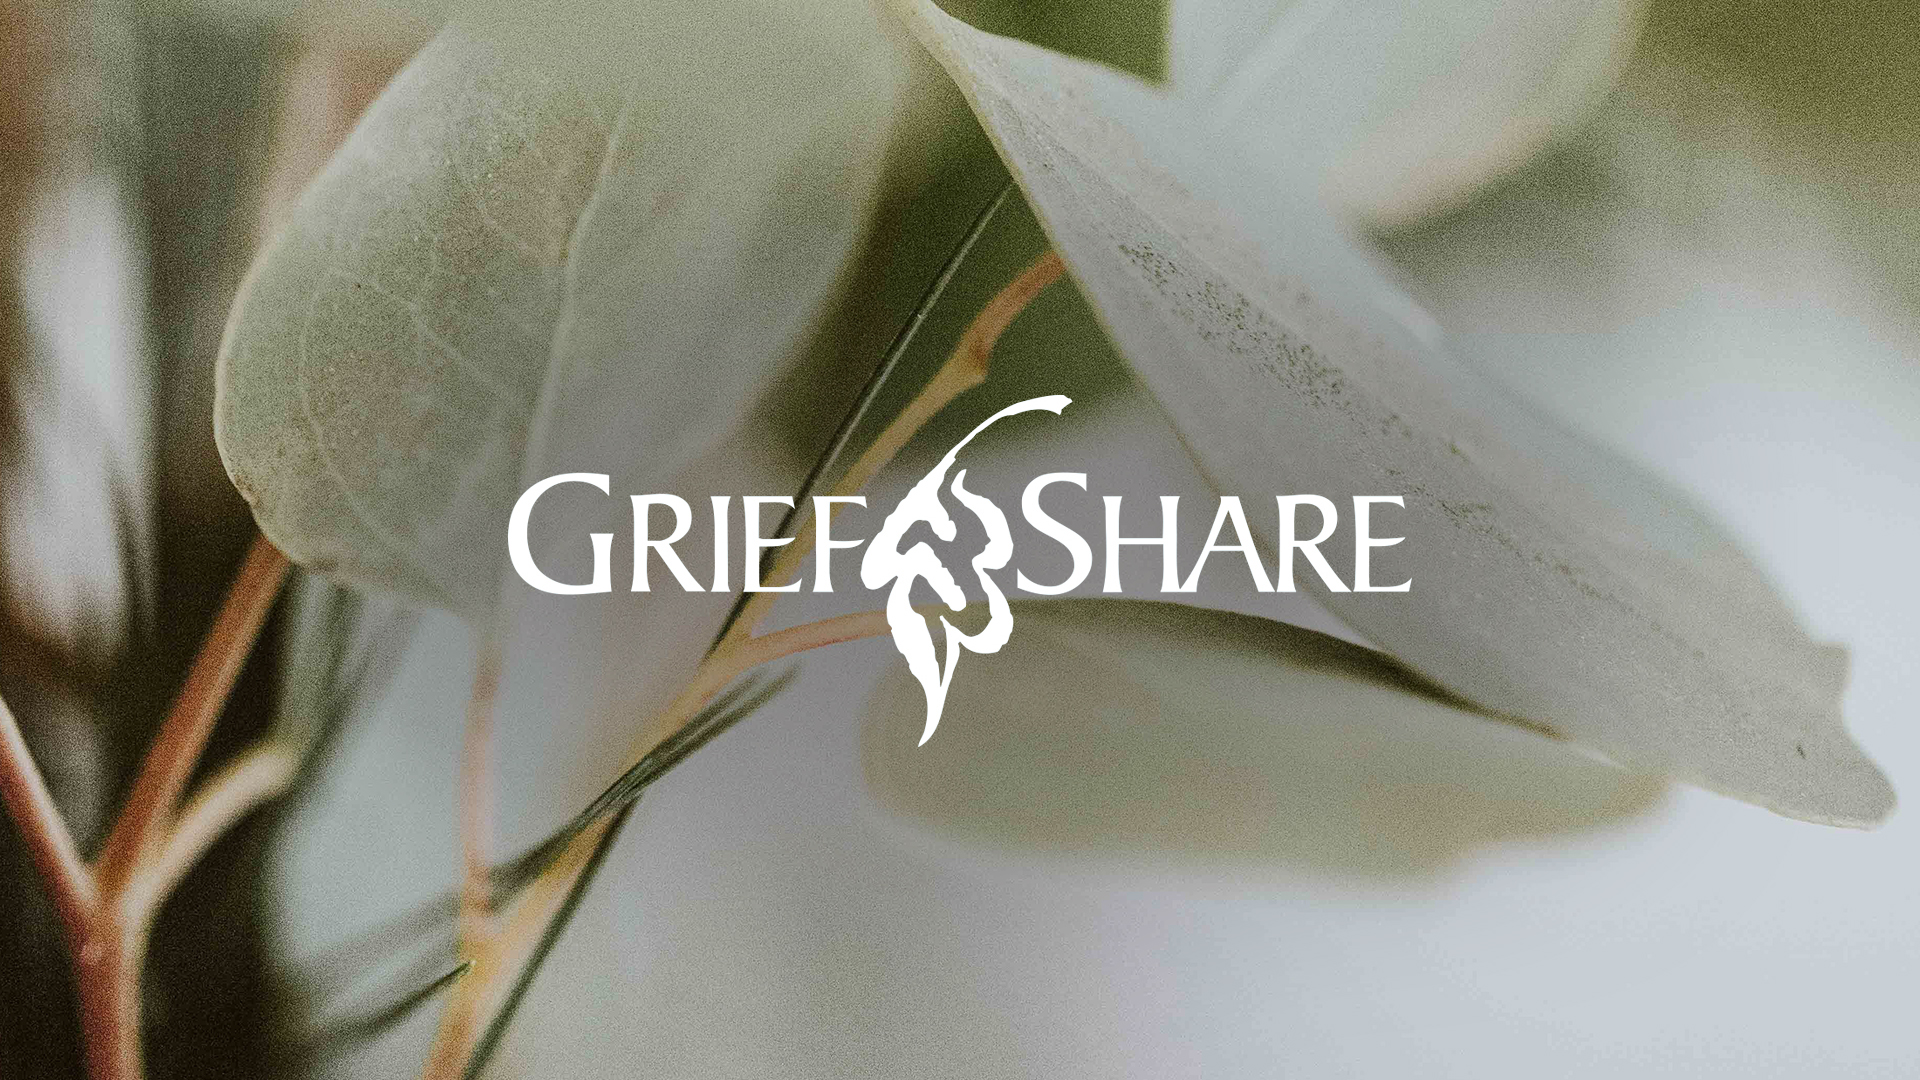 Grief share